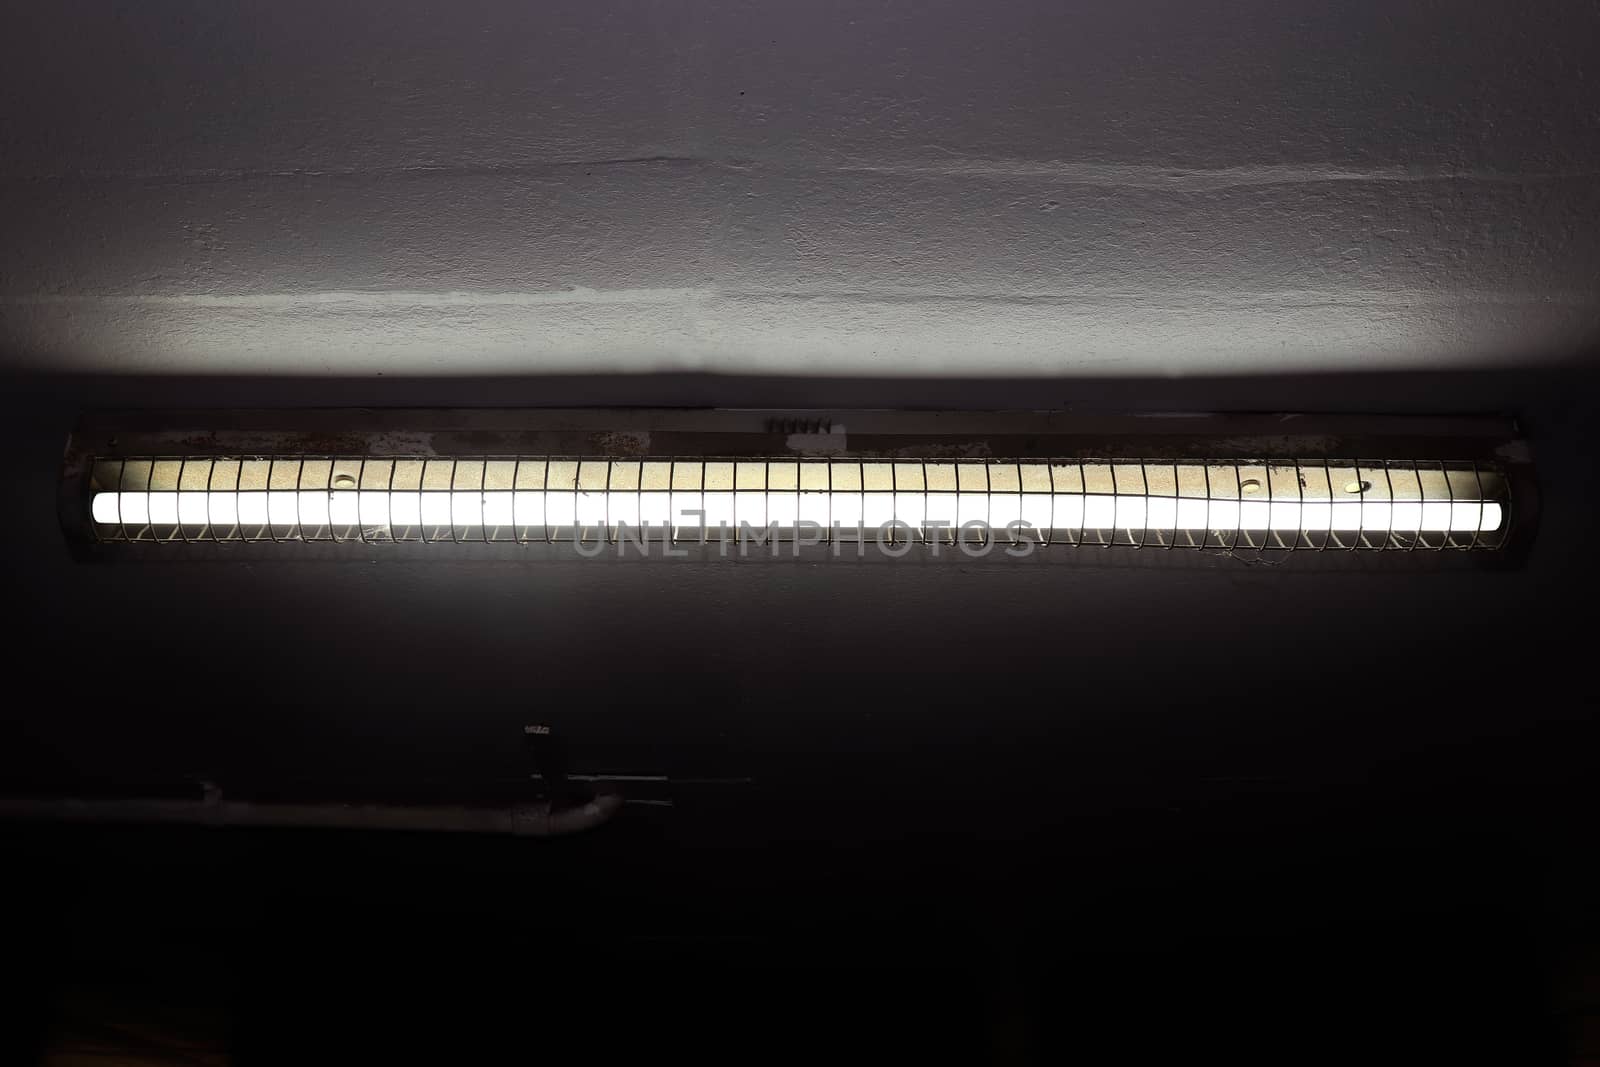 old fluorescent lamps on the ceiling, fluorescent lamps in dark, neon light, fluorescent light bulb as electric energy by cgdeaw